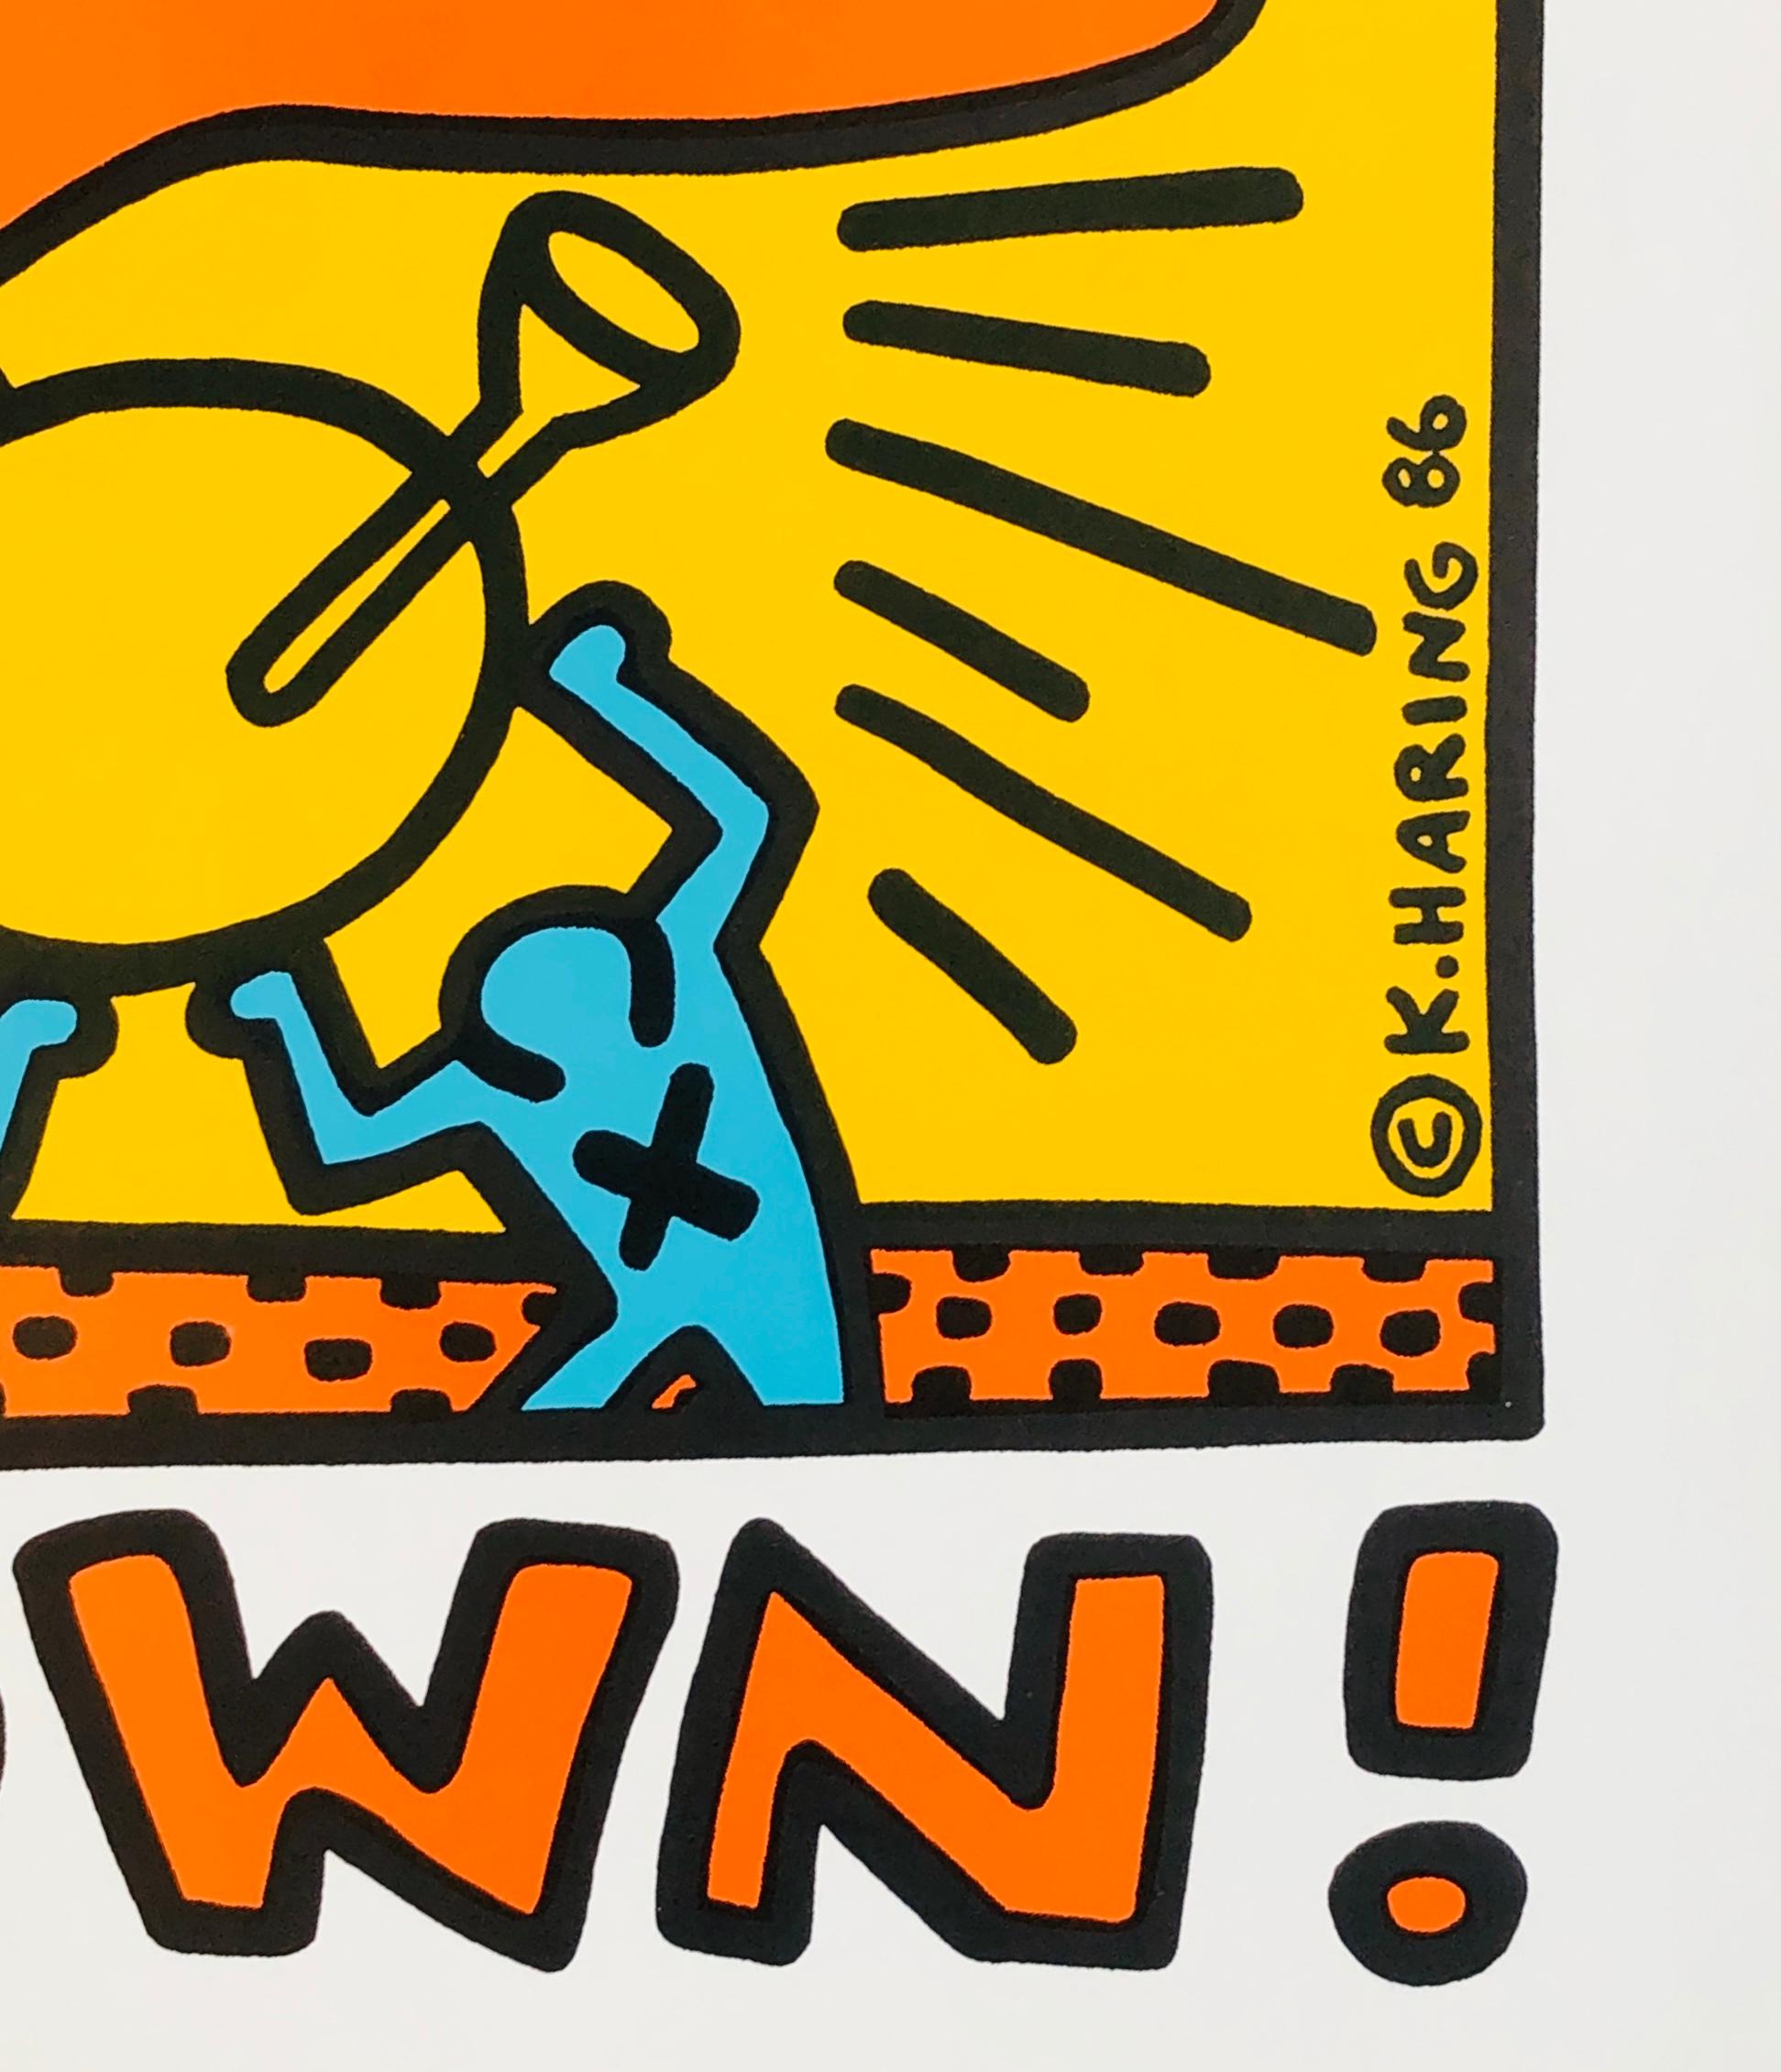 Keith Haring Crack Down! 1986:
Vintage original Keith Haring anti-drug poster, 1986.

Off-set lithograph on heavy weight paper. 
Dimensions: 17 x 22 inches.
Minor signs of handling; otherwise excellent condition; well-preserved, crisp colors. 
1st